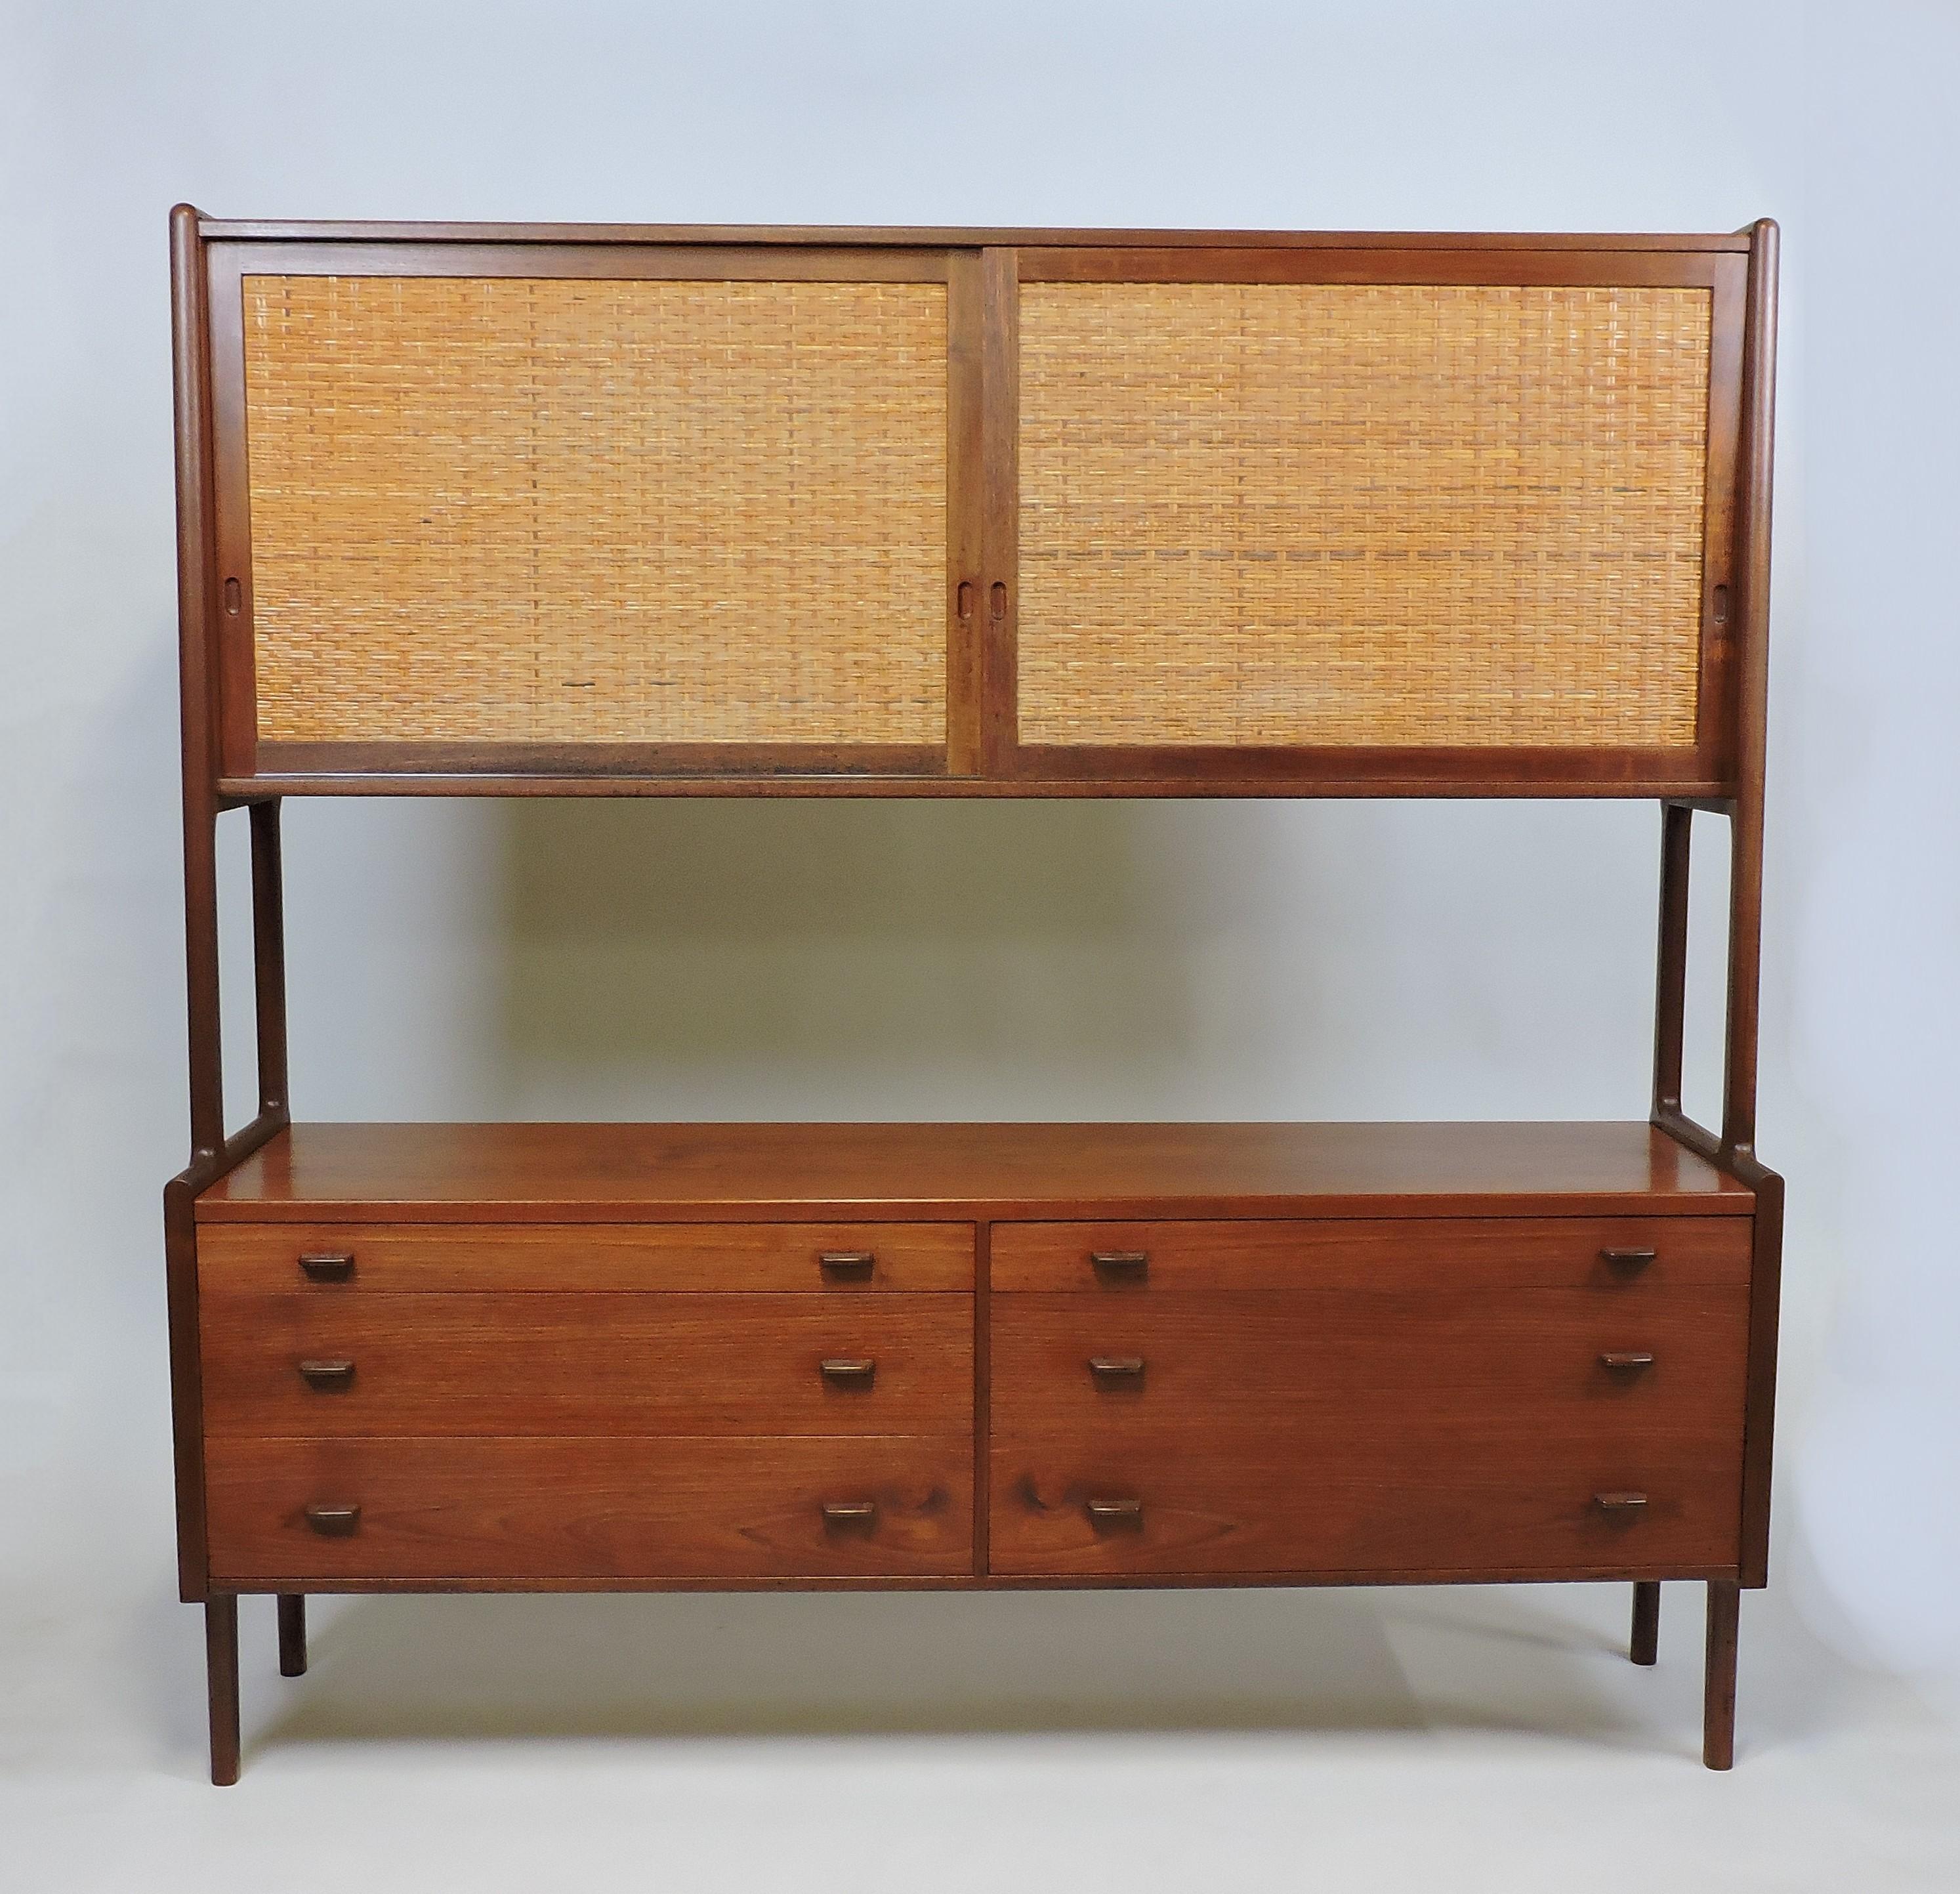 Beautiful two-tier credenza in teak designed by Hans Wegner and manufactured in Denmark by Ry Mobler. This cabinet has six drawers and two sliding doors with cane fronts above. Pictured with four adjustable shelves, a fifth is available. Stamped